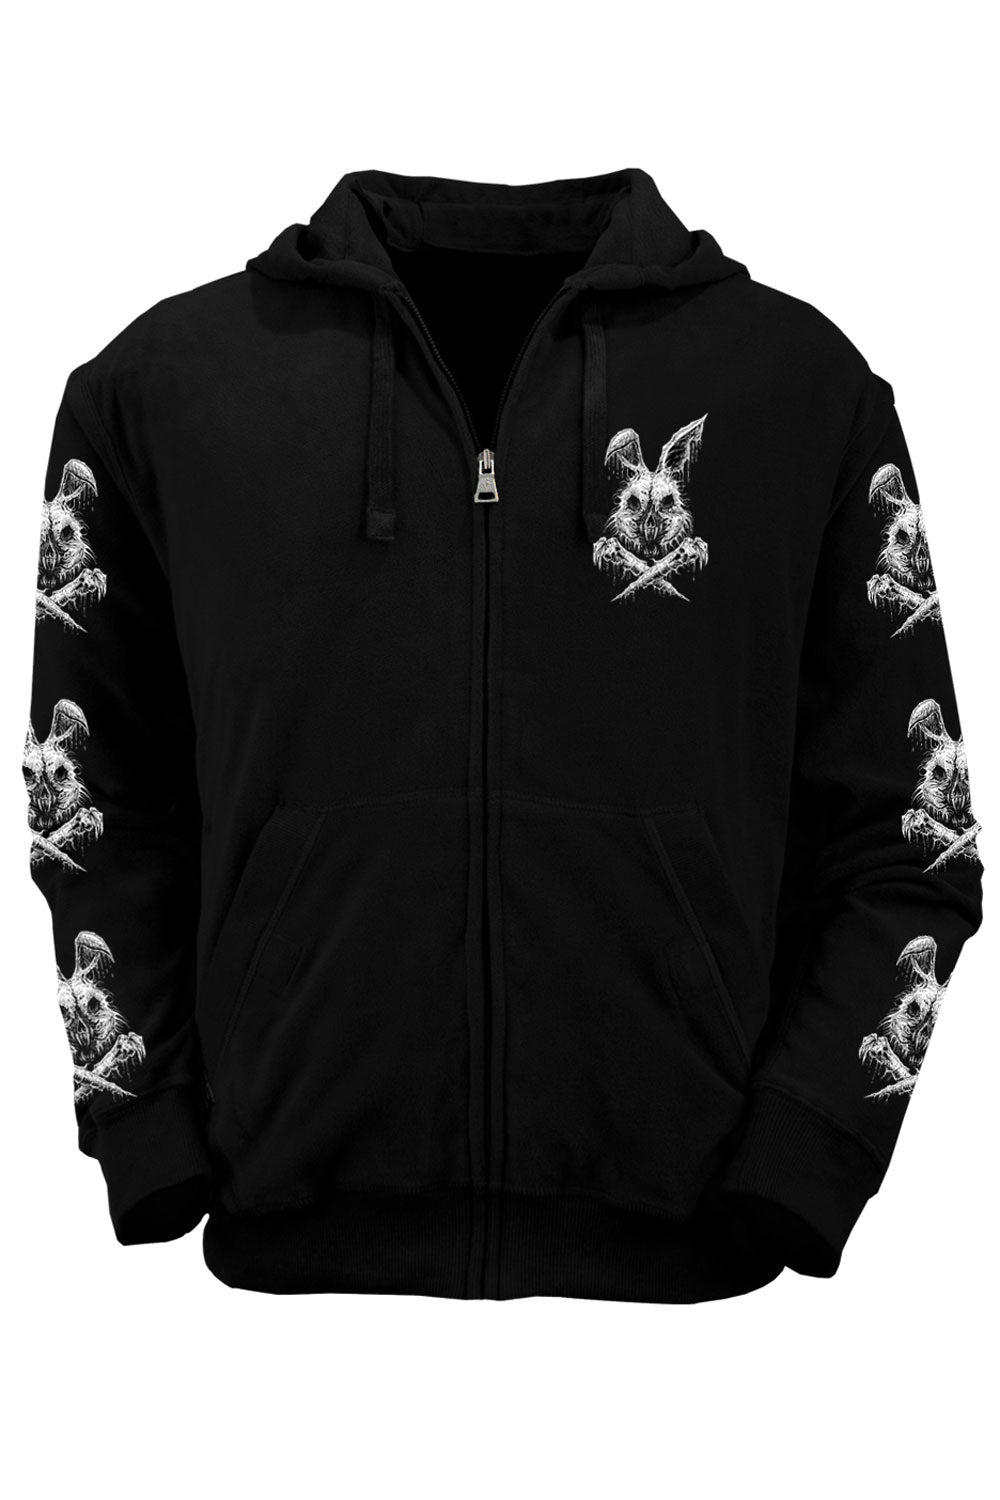 Zombunny Hoodie [Zipper or Pullover]